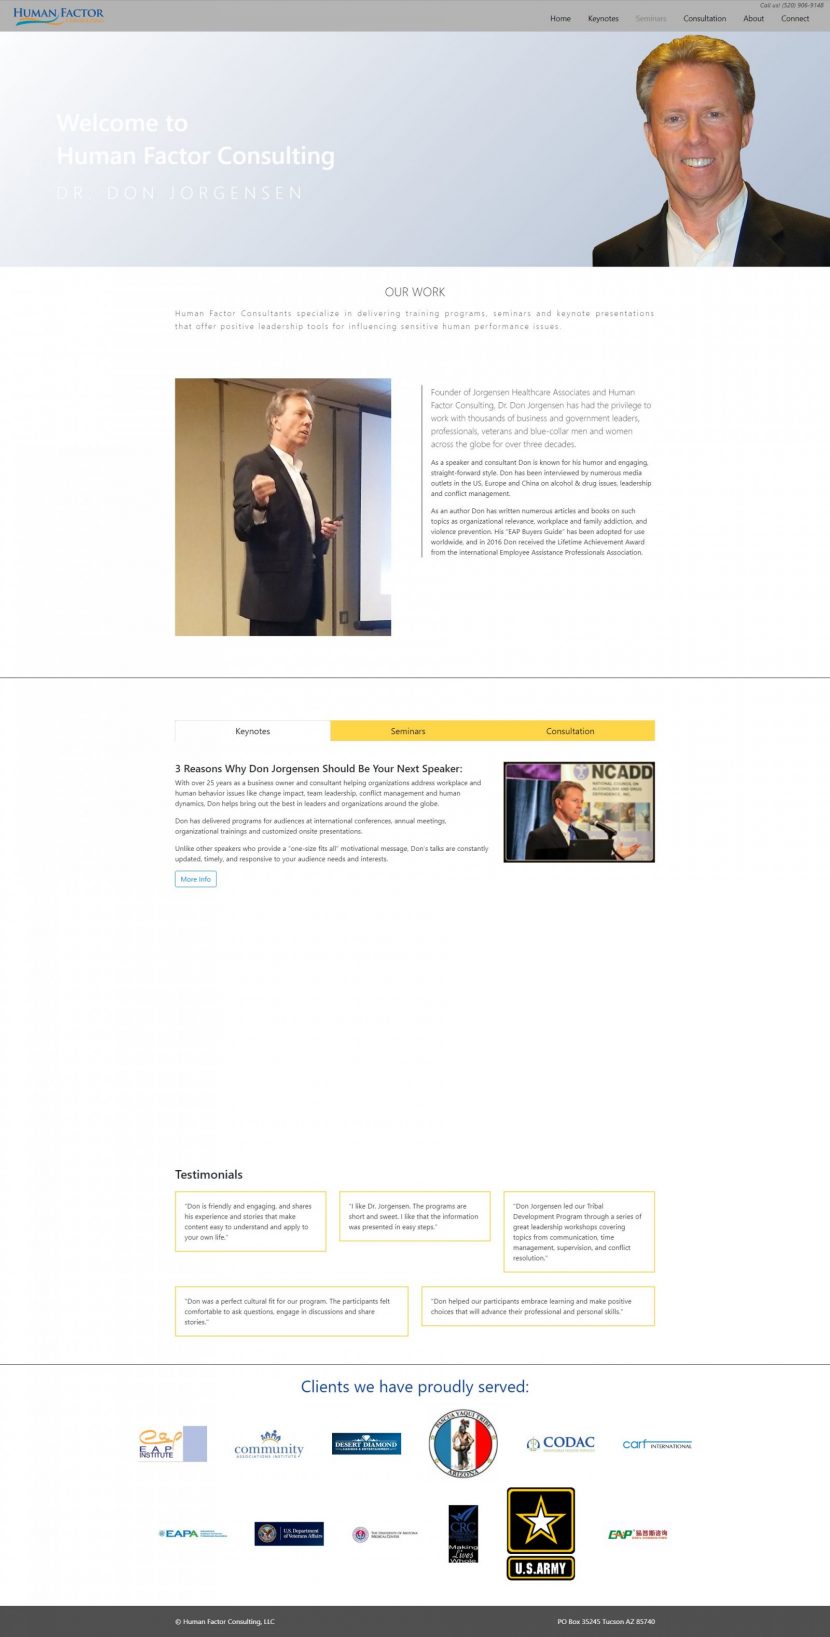 An image of a website featuring a man in a suit, emphasizing the Human Factor.